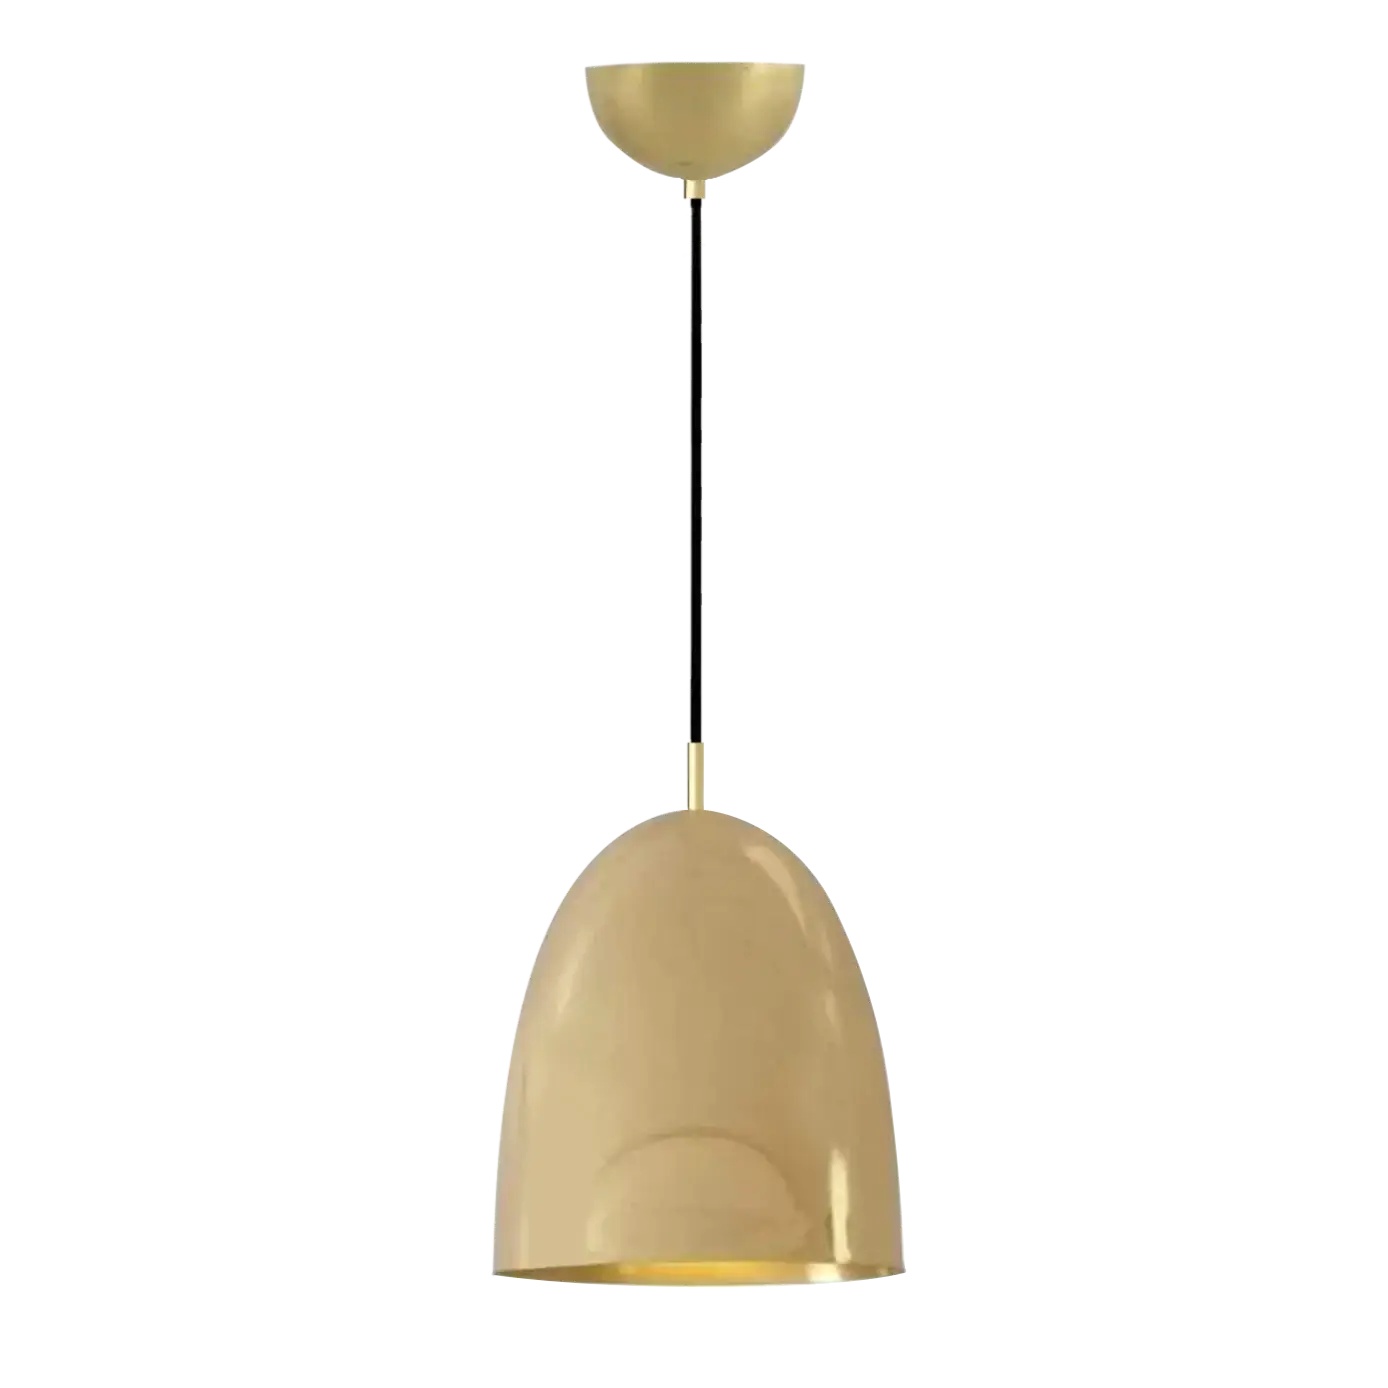 Dounia home Pendant light in Polished brass   made of Metal, Model: Roya  dome